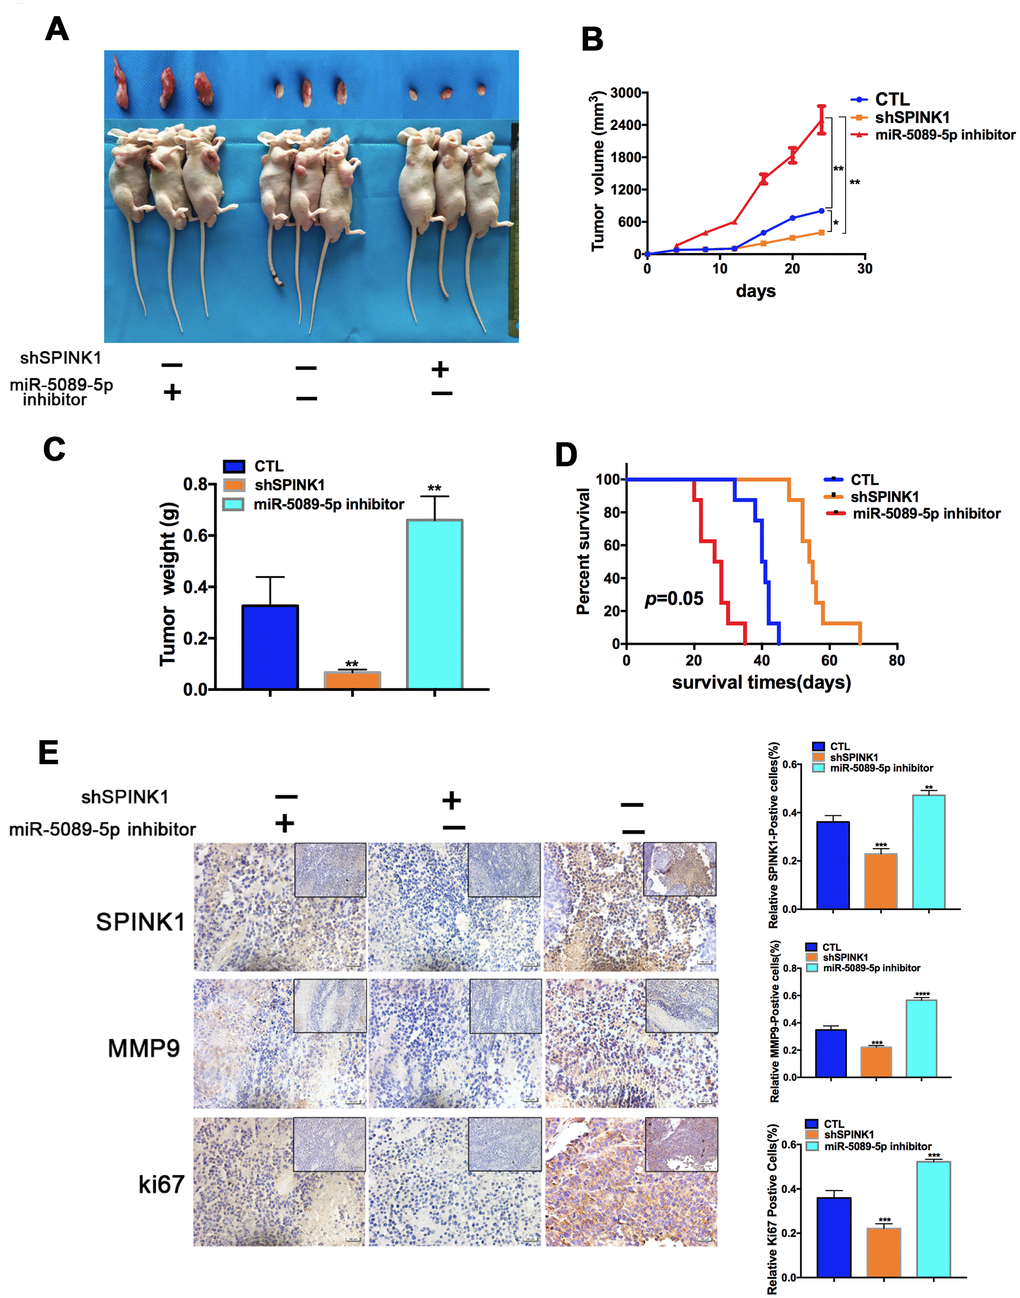 Role of miR-5089-5p and SPINK1 in Enz resistance and metastasis in vivo. (A) Representative images of tumor xenografts excised from mice implanted with Enz-resistant cells with/without miR-5089-5p inhibitor treatment. (B, C) Tumor volumes and weight of different groups. (D) Survival rate of tumor-bearing mice of different groups (p=0.05, Kaplan-Meier). (E) In situ expression levels of SPINK1, ki67 and MMP9 in the tumor tissues (Scale bar—100 μm; The top right corner, Scale bar—50 μm).